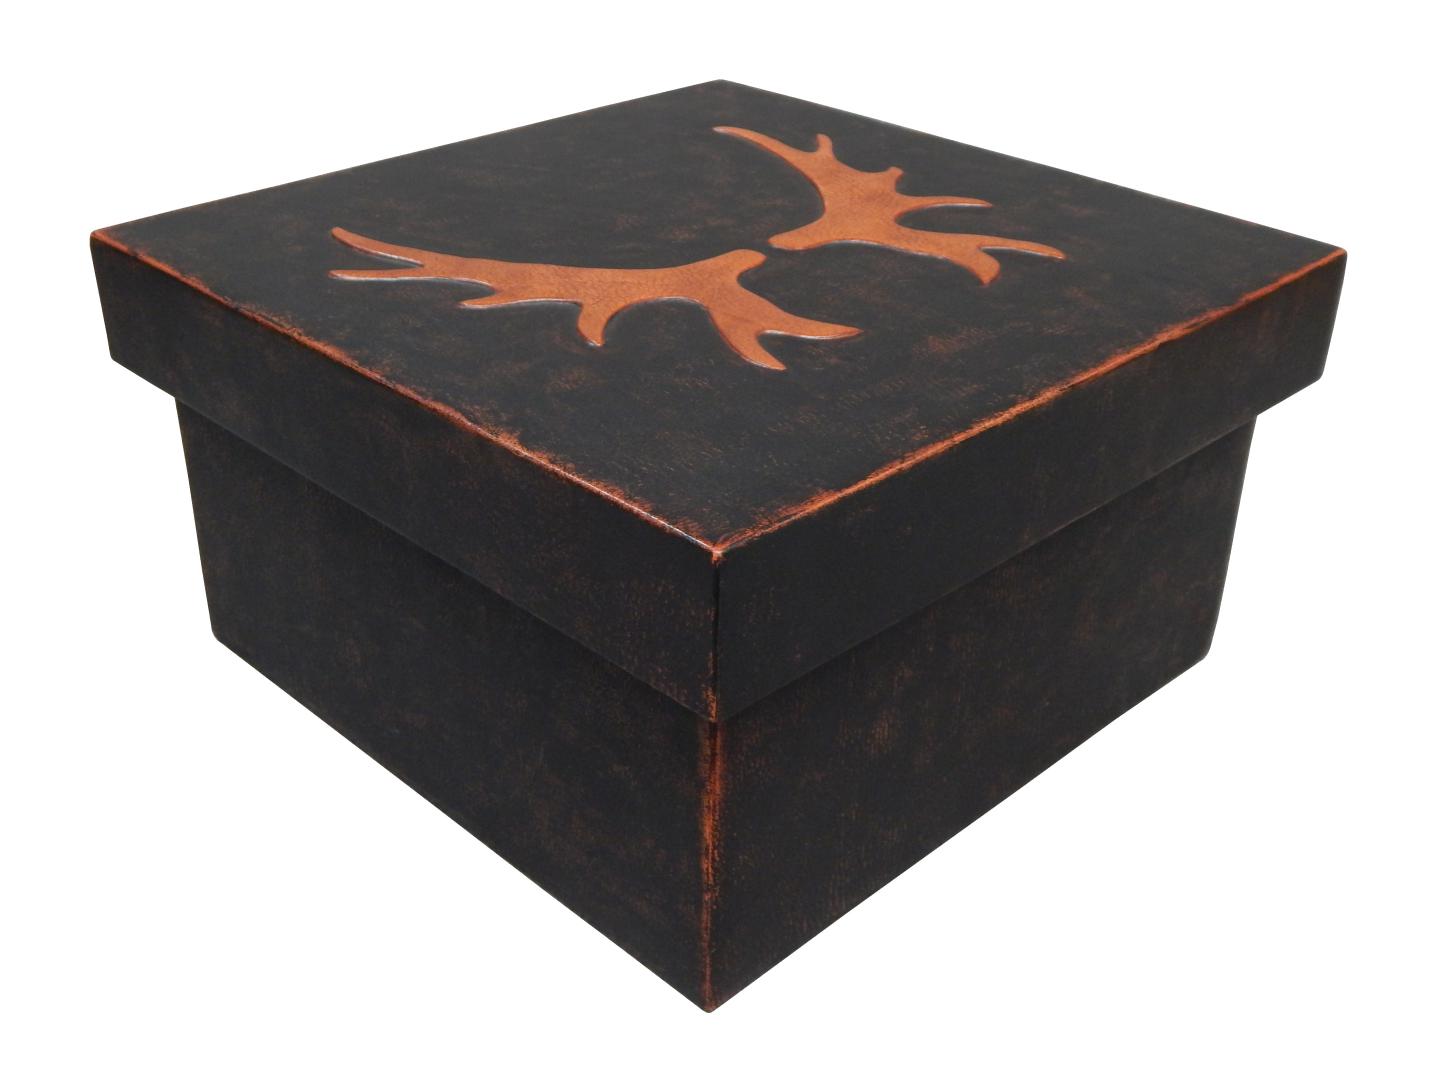 leather box with an antler moose horns design on high relief